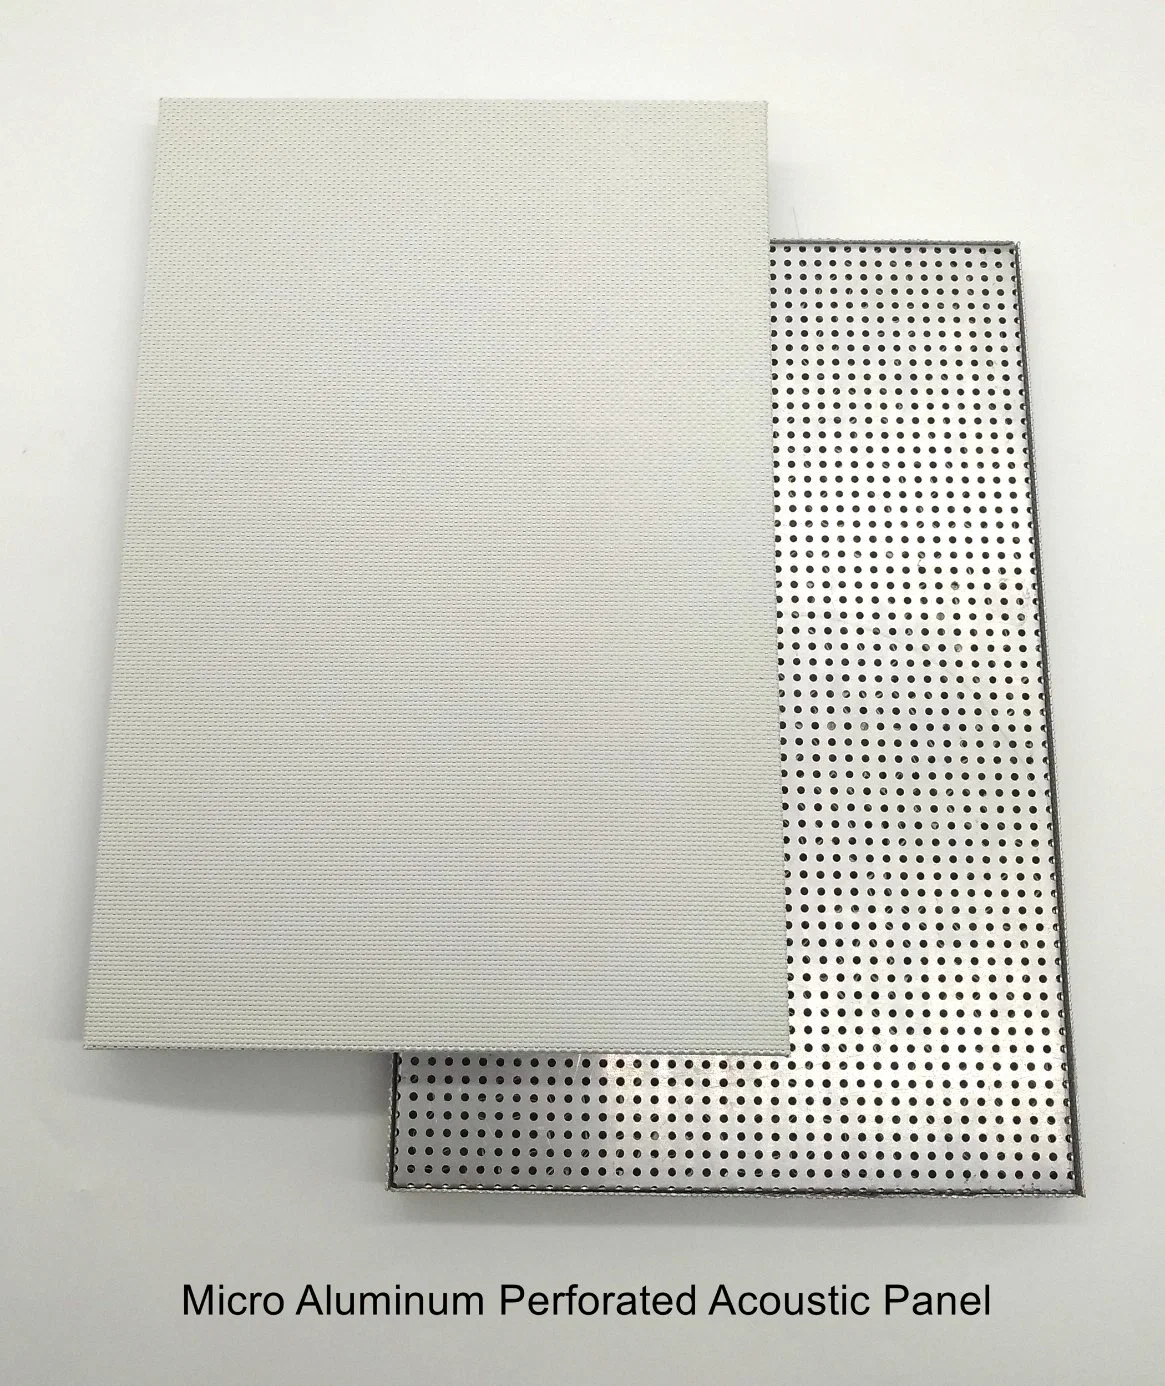 Aluminum Micro Perforated Acoustic Panel Interior Soundproofing Wall Ceiling Building Material